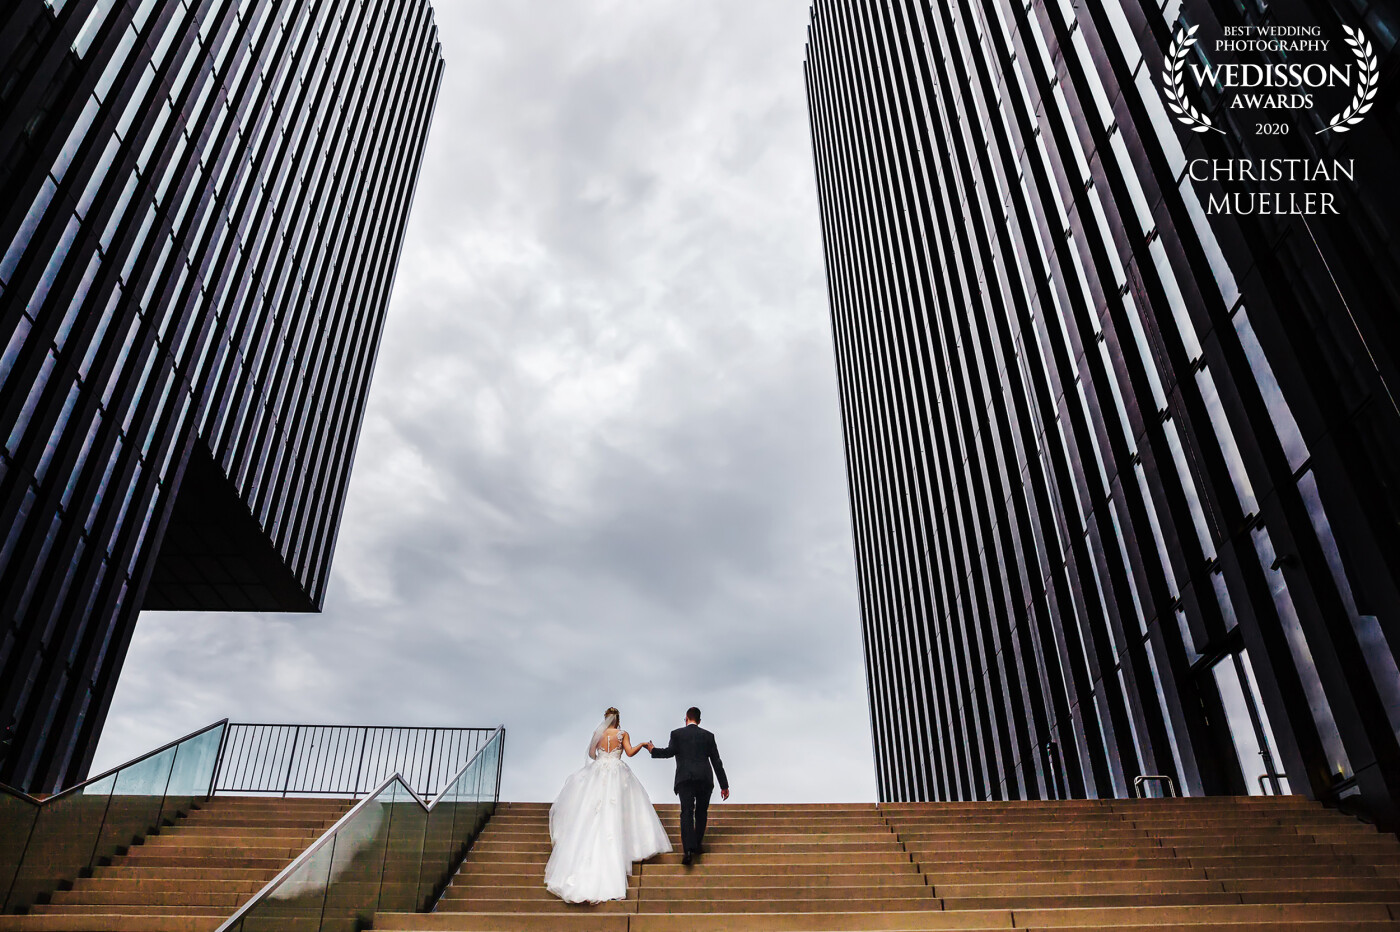 It was rainy and cloudy on their wedding day, but I love the mood with the dramatic clouds in this picture. And the urban look of the high rises give a good frame for the couple. <br />
The picture was made at the Medienhafen in Düsseldorf, Germany.